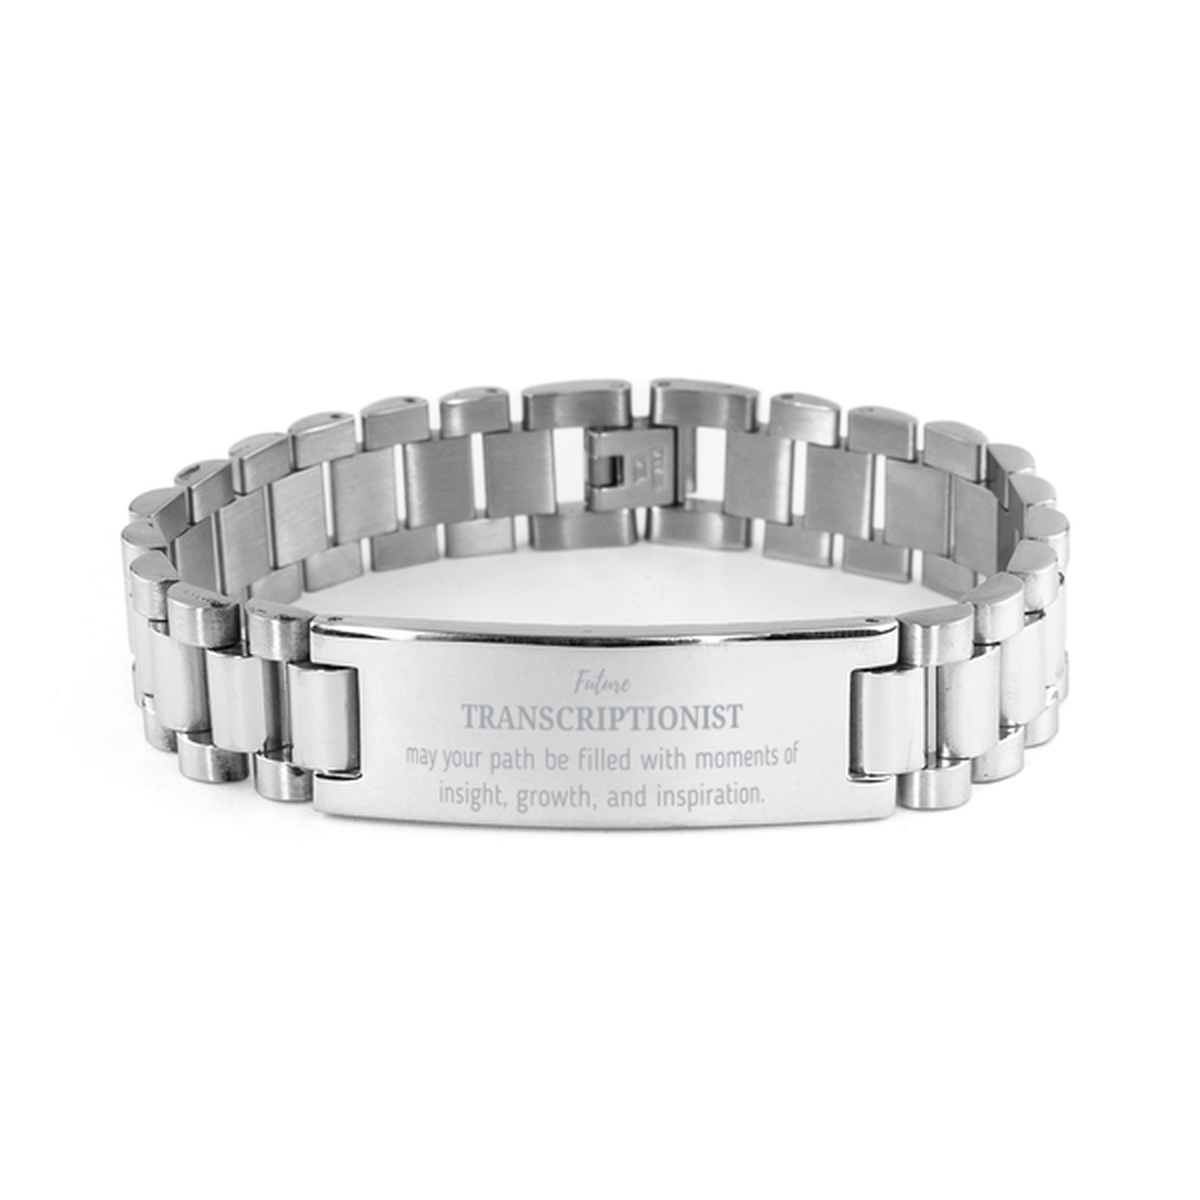 Future Transcriptionist Gifts, May your path be filled with moments of insight, Graduation Gifts for New Transcriptionist, Christmas Unique Ladder Stainless Steel Bracelet For Men, Women, Friends